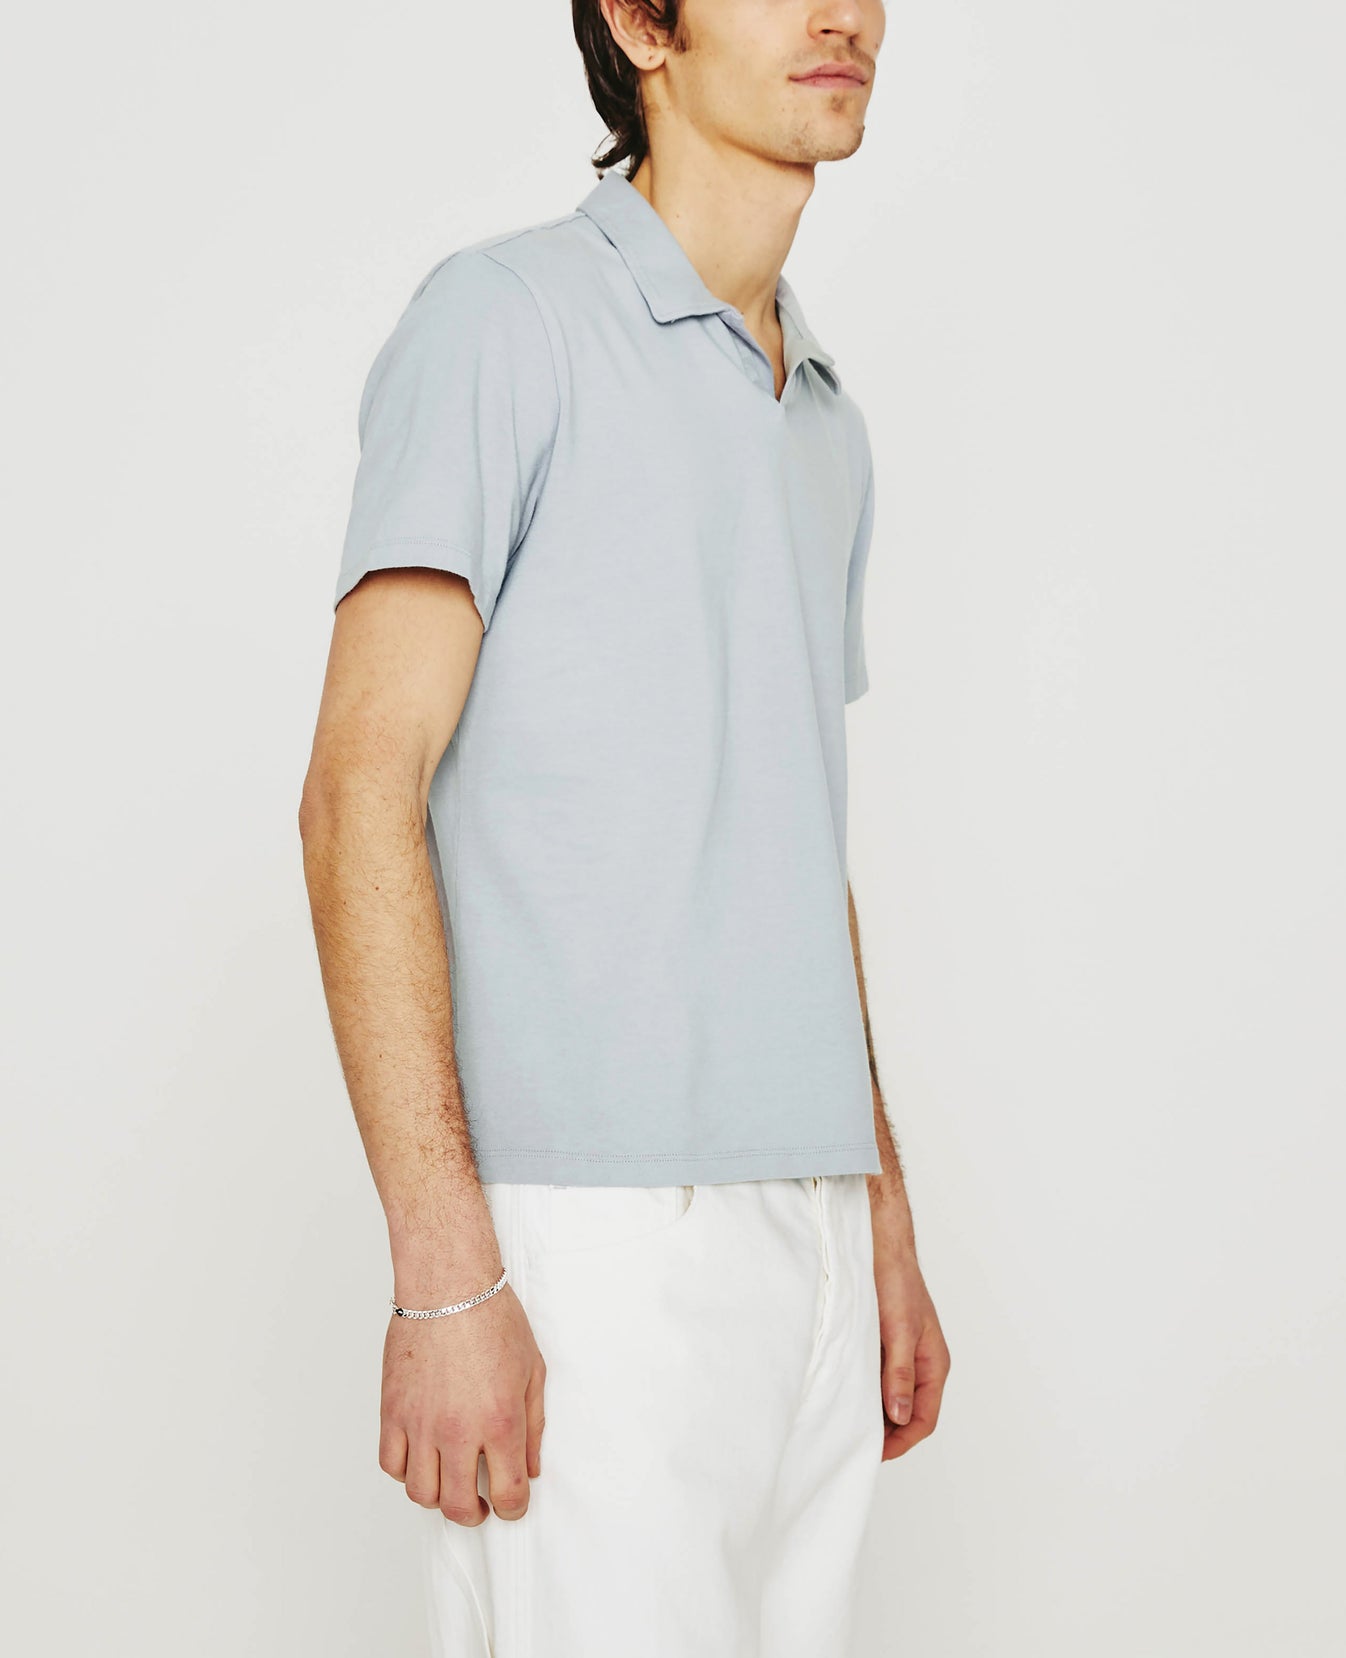 Bryce Johnny Collar White Sands mens Top Photo 2